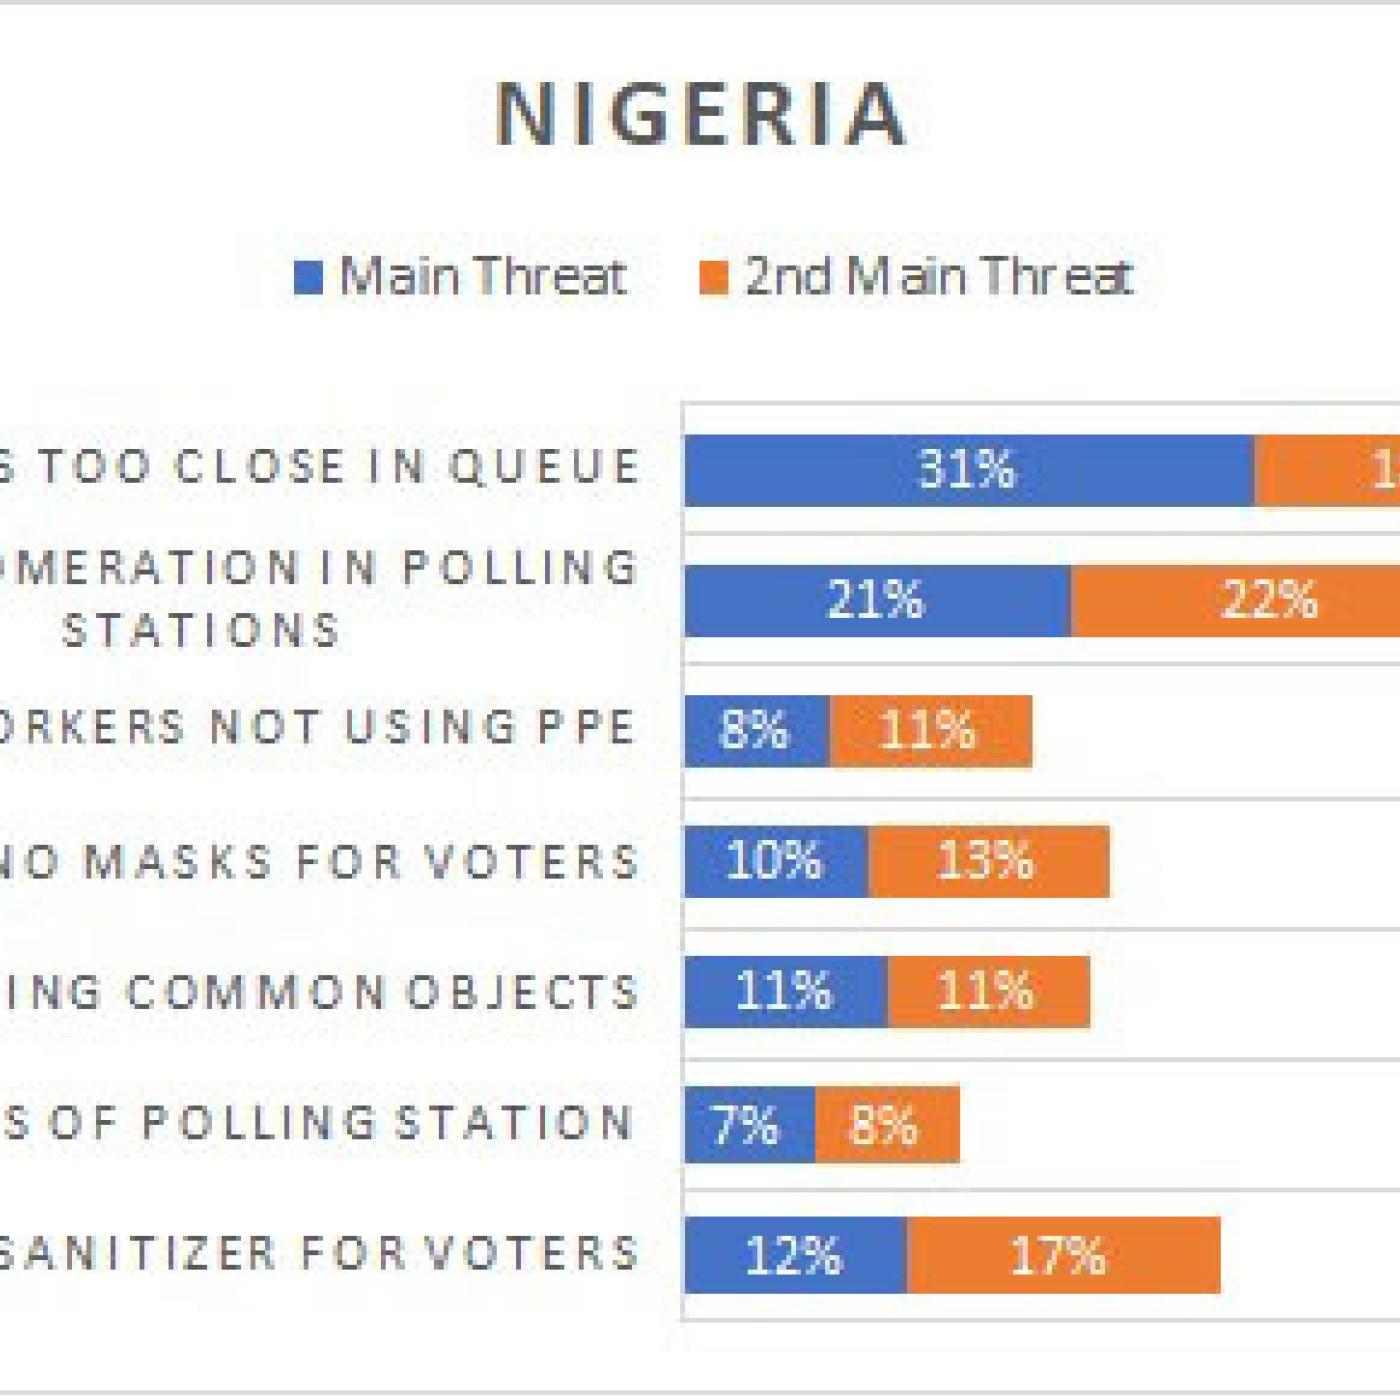 Chart depicting voters' concerns in Nigeria